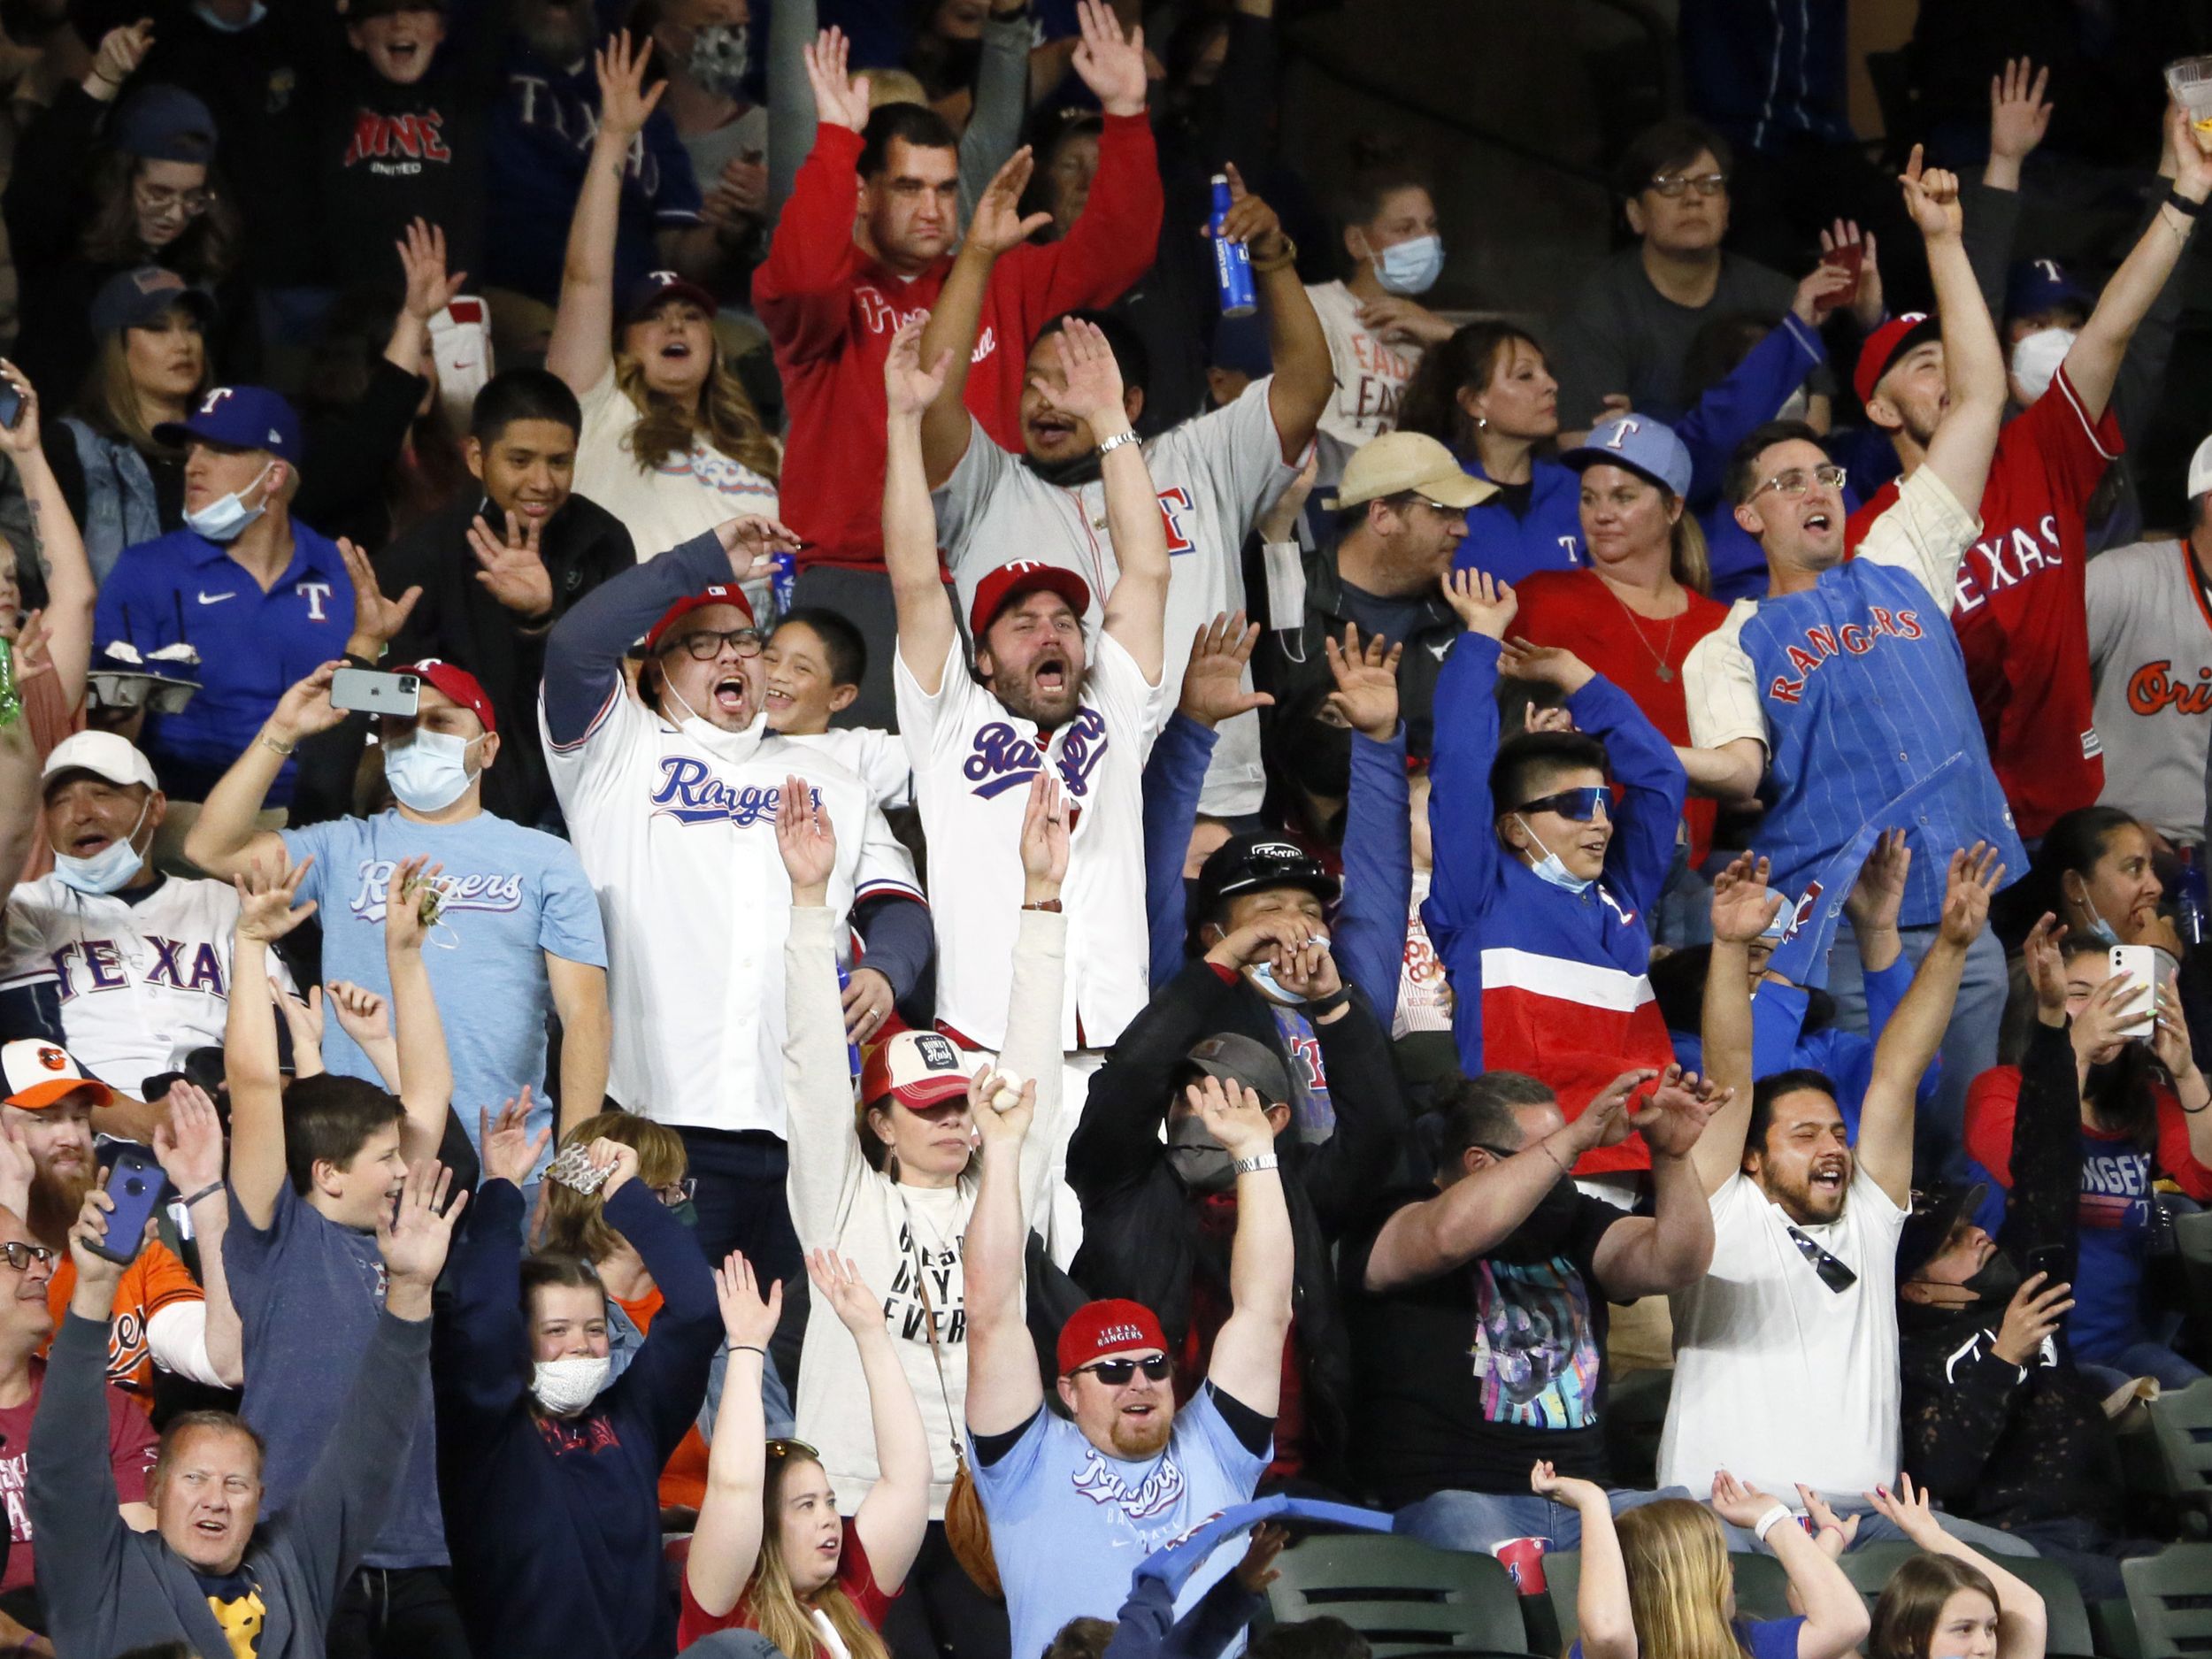 Texas Rangers will pack in the fans on Opening Day at Globe Life Field -  CultureMap Fort Worth